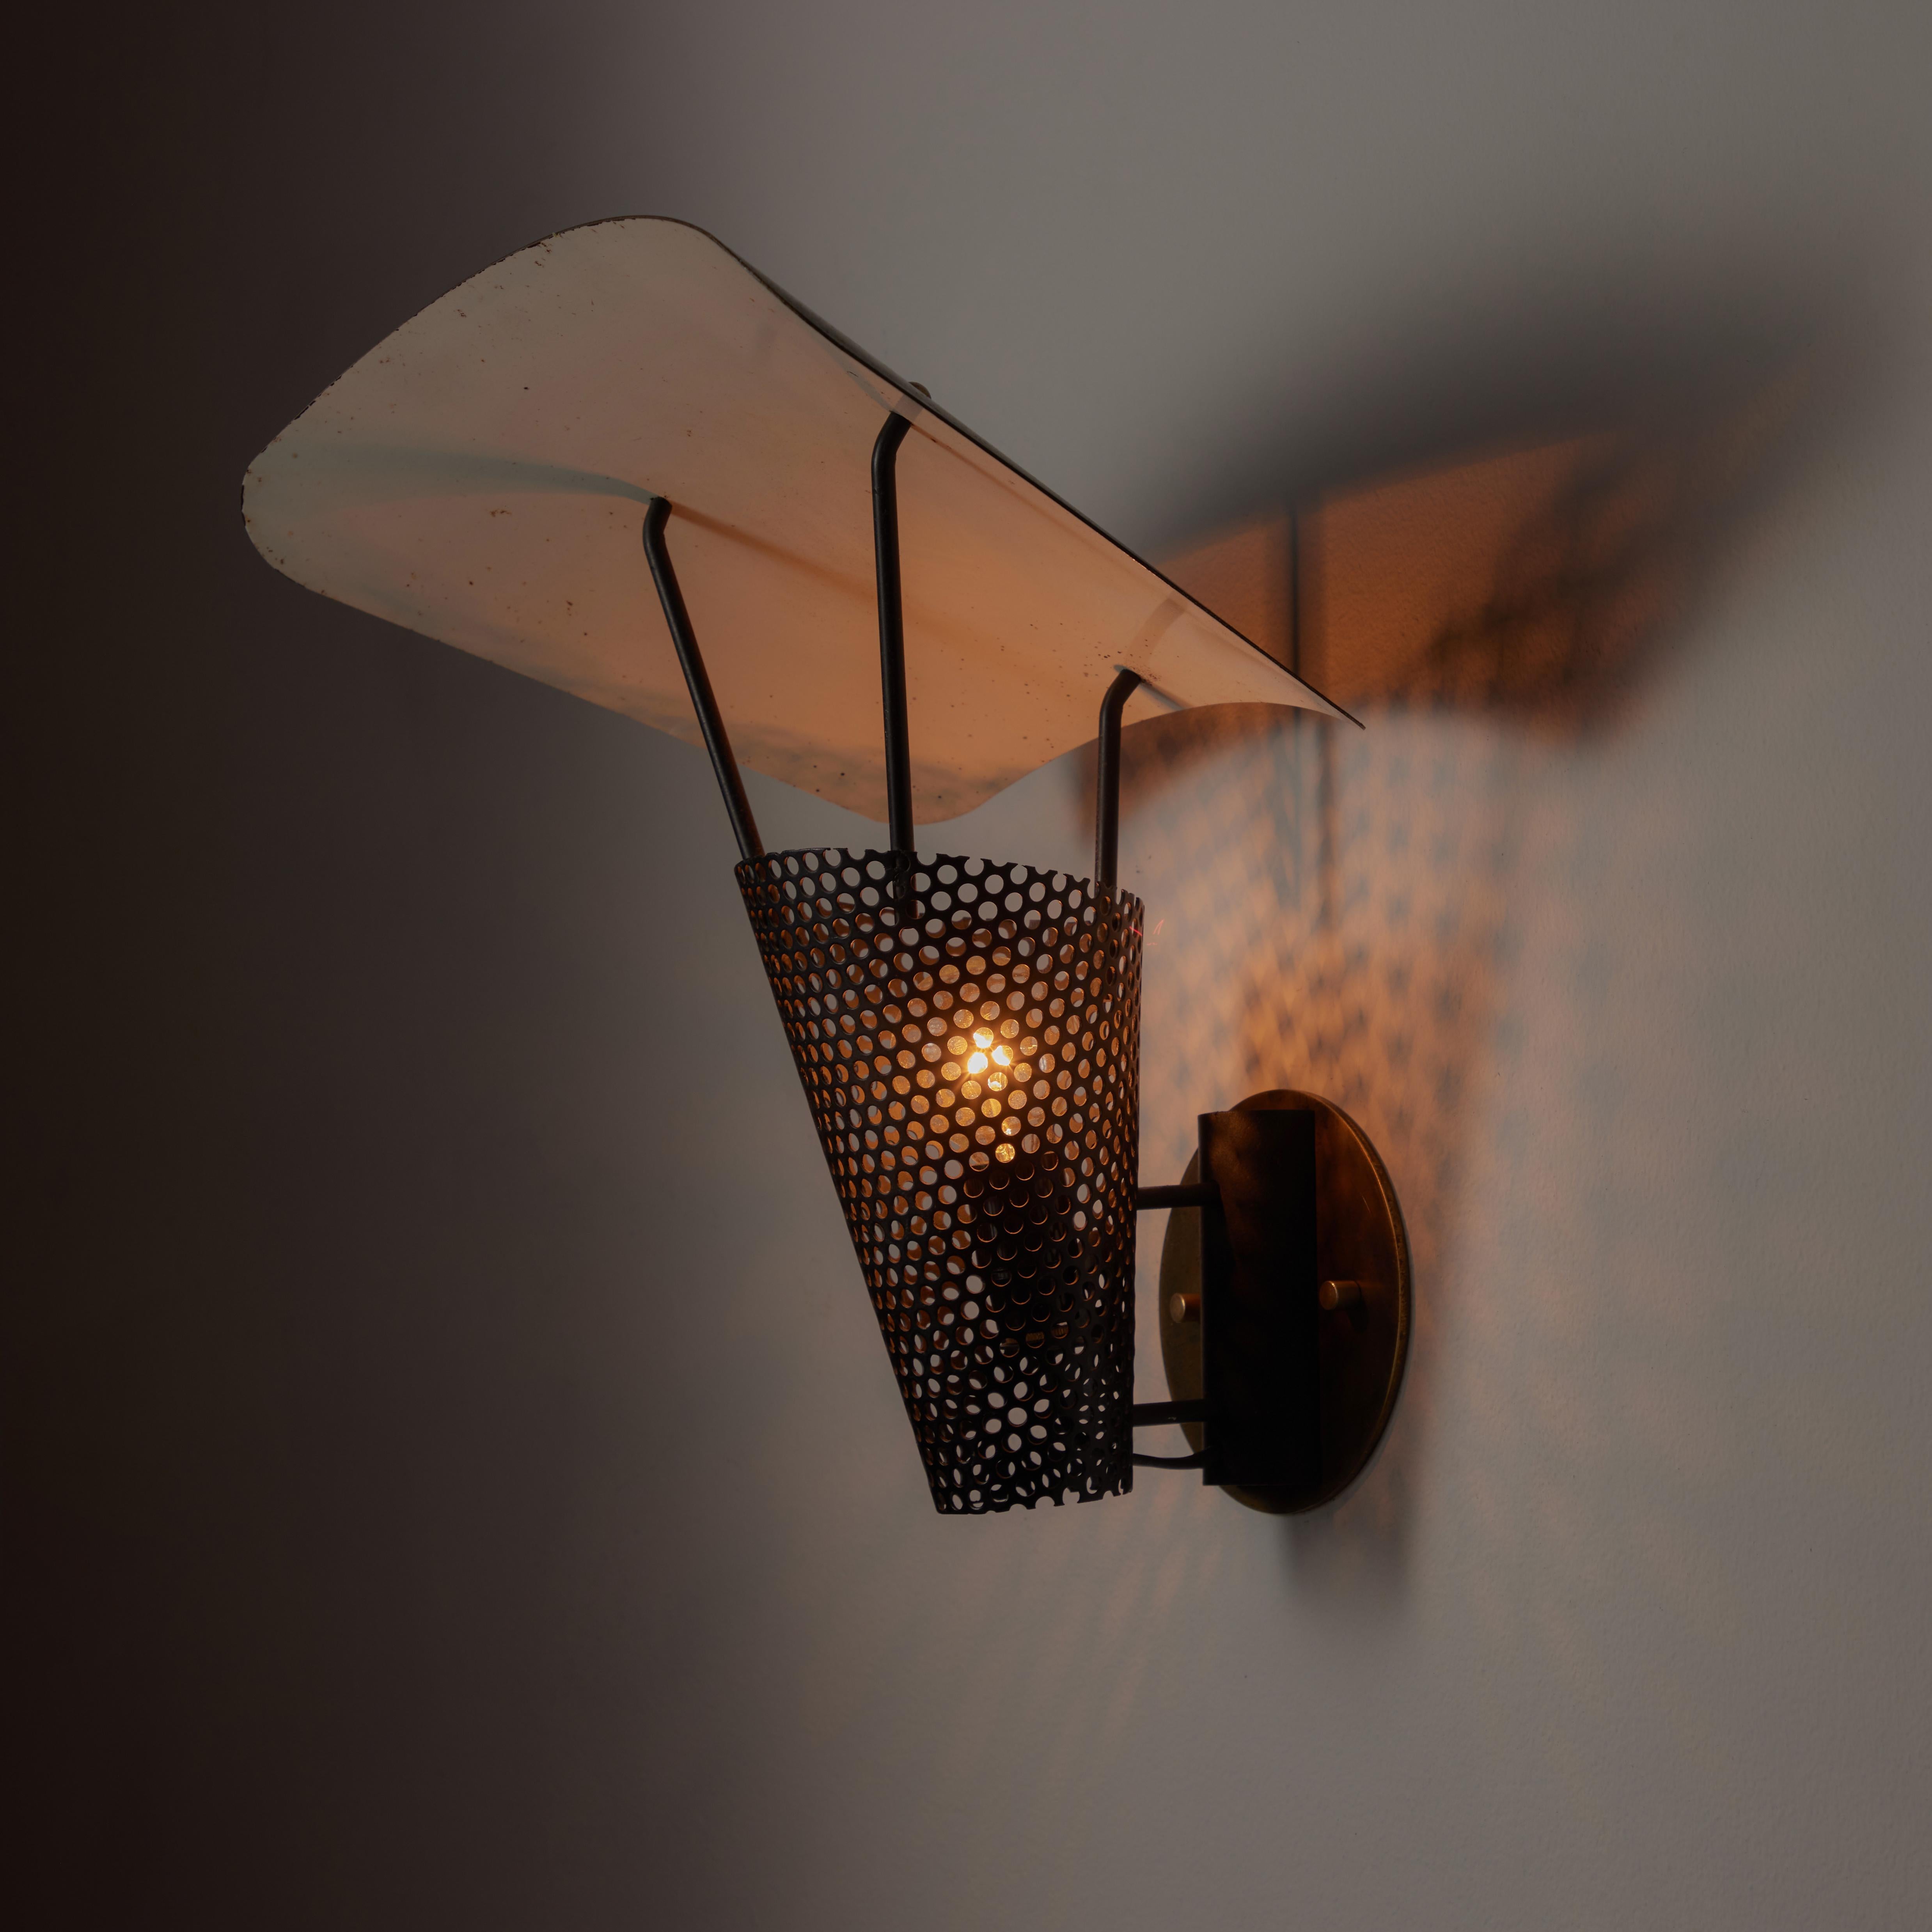 Single 'Cerf-Volant' sconce by Jacques Biny. Designed and manufactured in France, circa the 1950s. Perforated shade, with an enameled black and white reflector umbrella. Custom US backplate. Holds one E14 socket type. We recommend one 60w bulb. Bulb